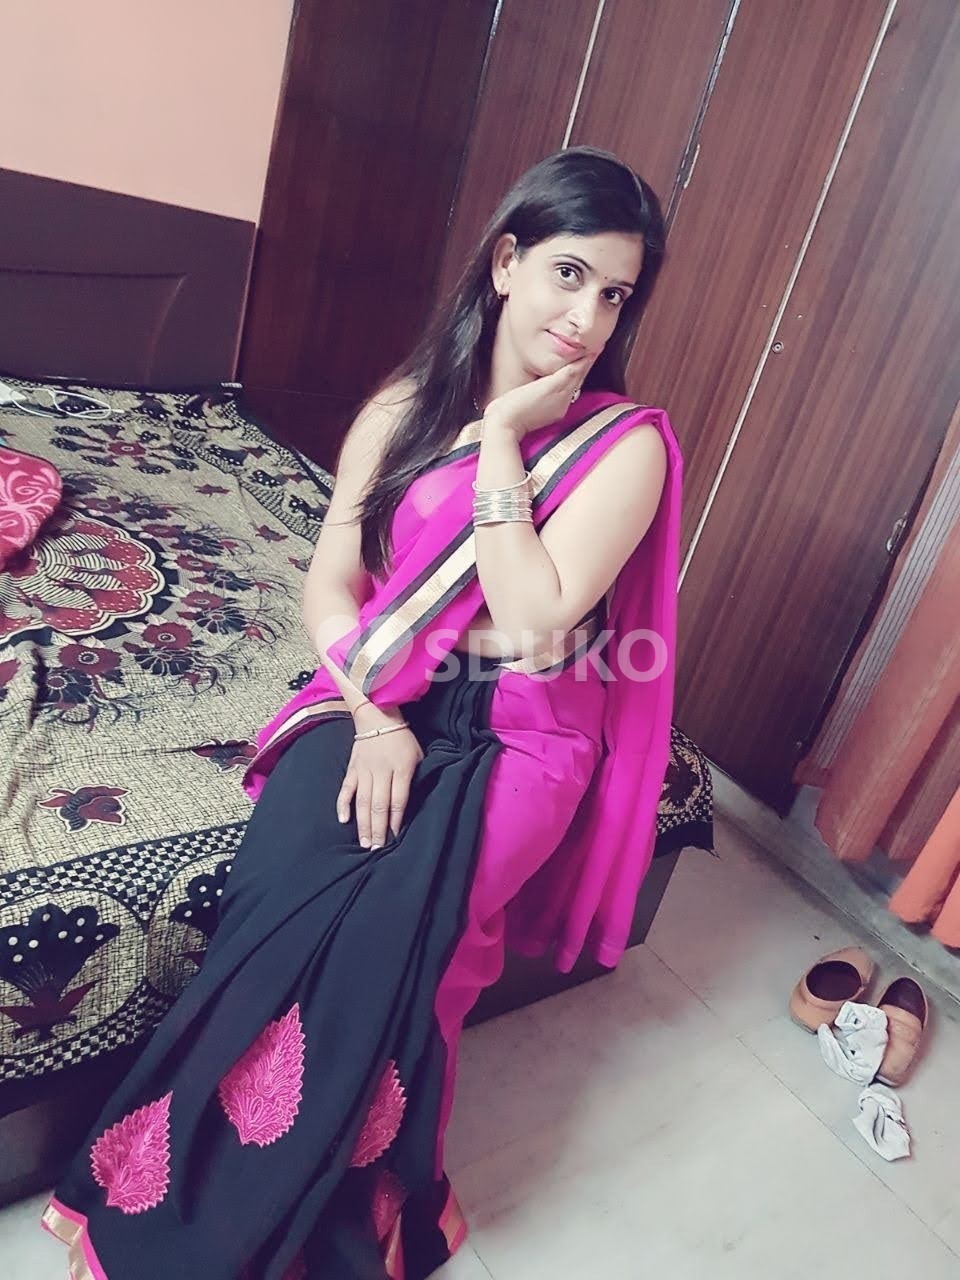 KAVYA UDUPI JUICY ADULT CLASSIFIED FIND HOT &HORNY STUFF NEAR YOU OUTCALL INCALL AFFORDABLE PRICE WHATSAPP 95710-81977